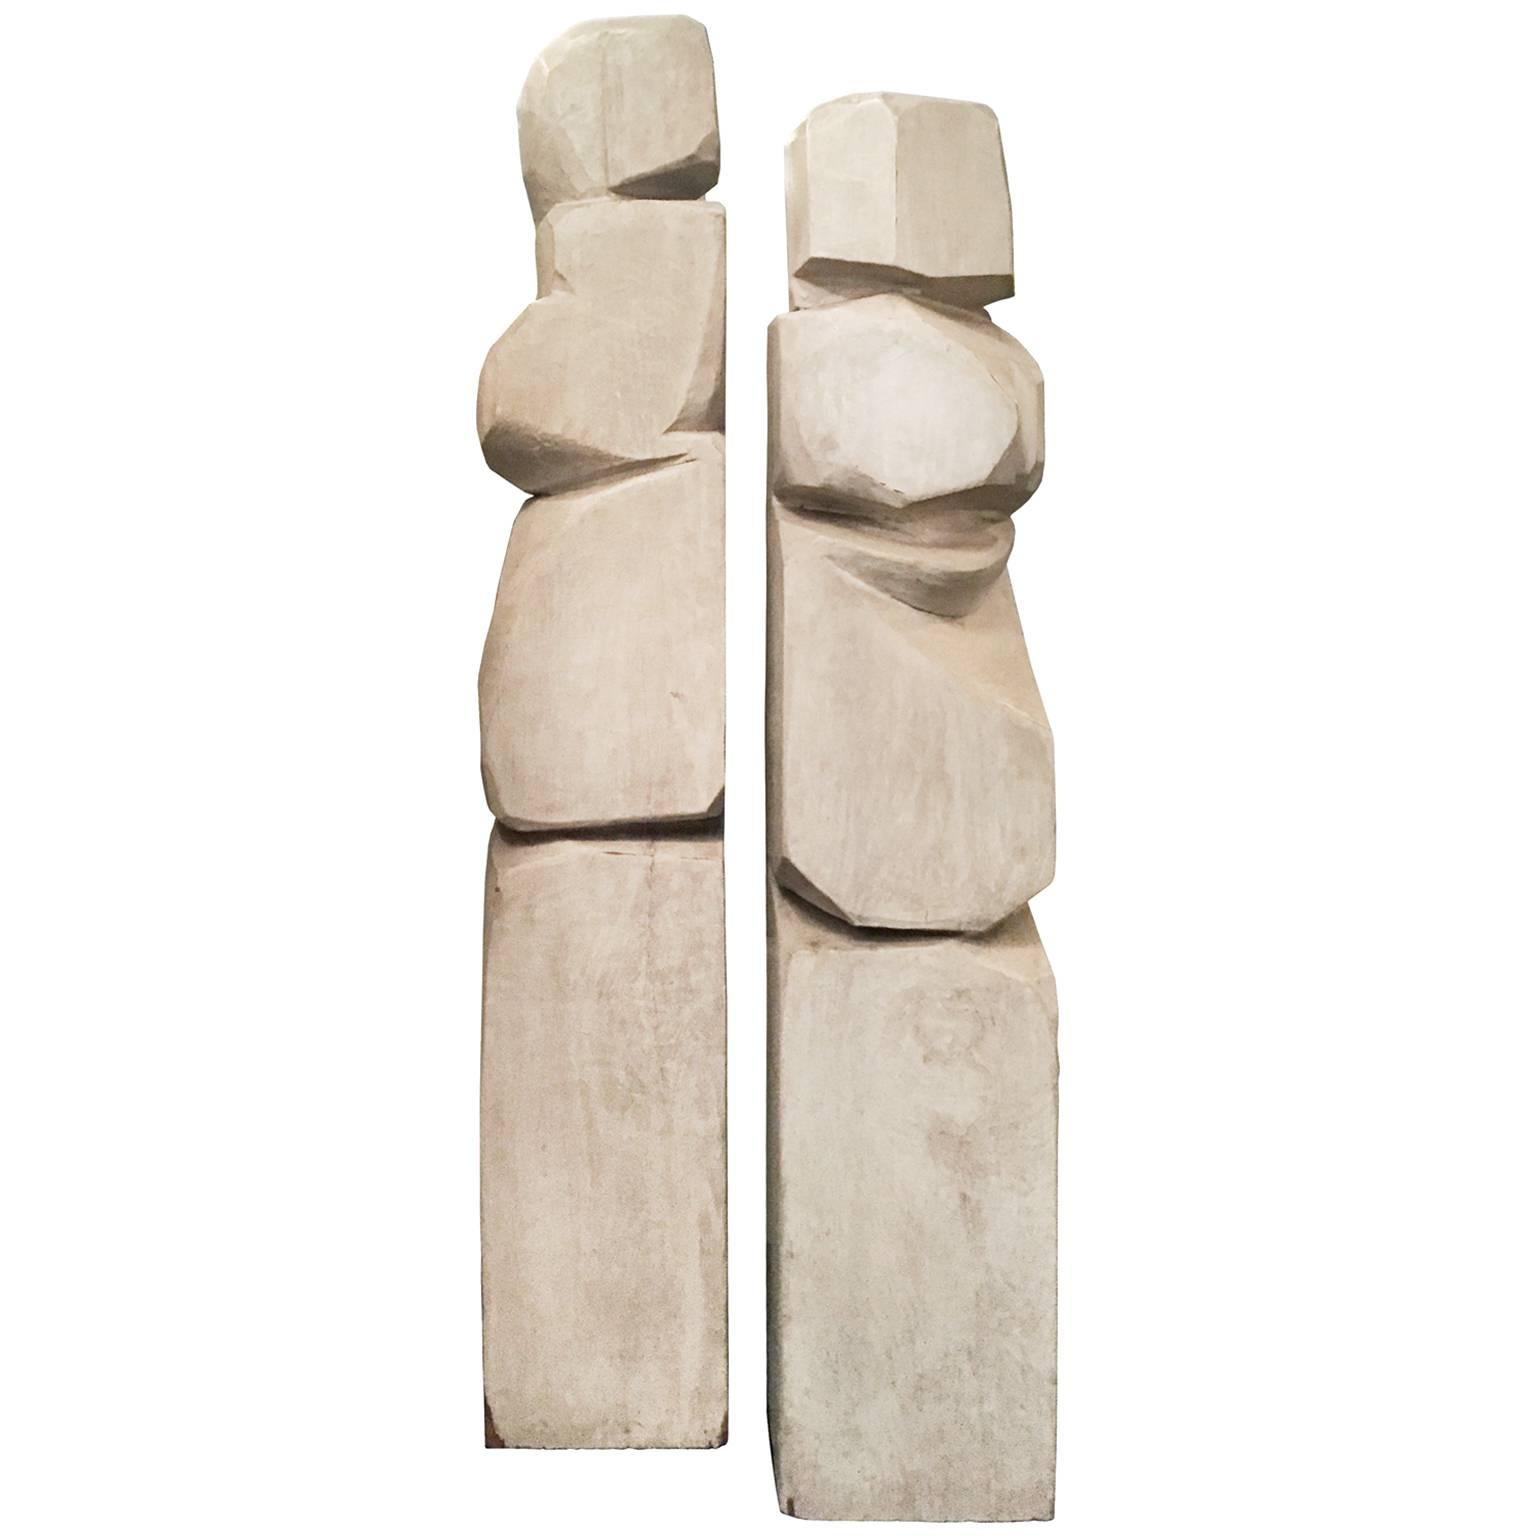 Midcentury abstract Expressionist carved and painted wood sculpture #2 by Salvatore Grippi. Signed and dated, USA, 1958. 

Pair available, priced individually.